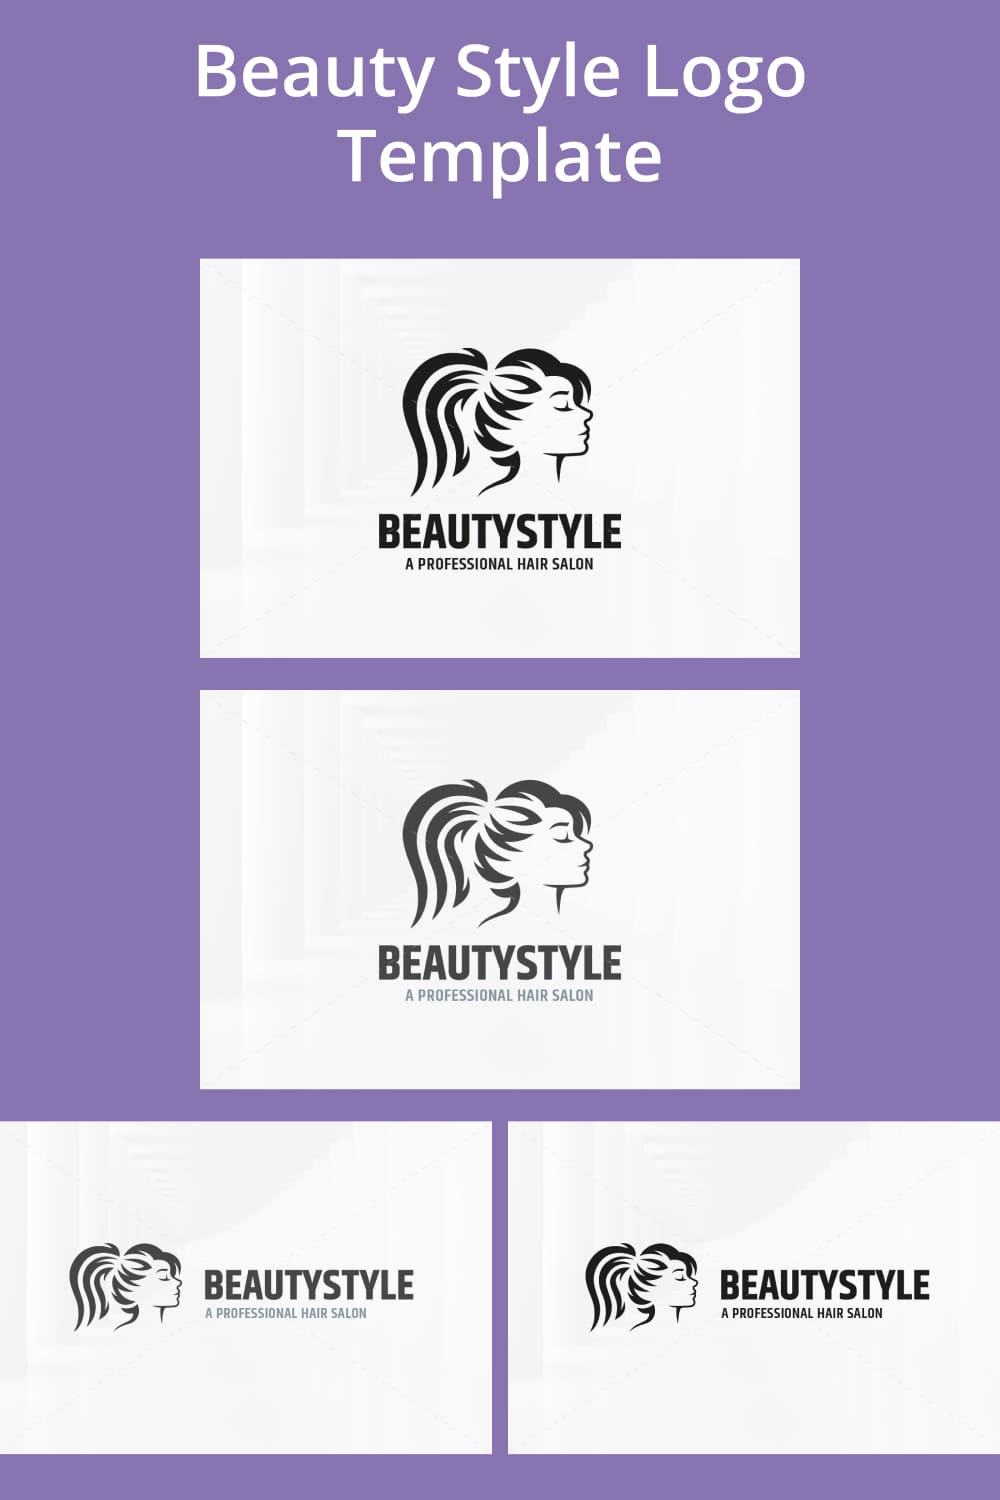 Beauty Style Logo Template - pinterest image preview.